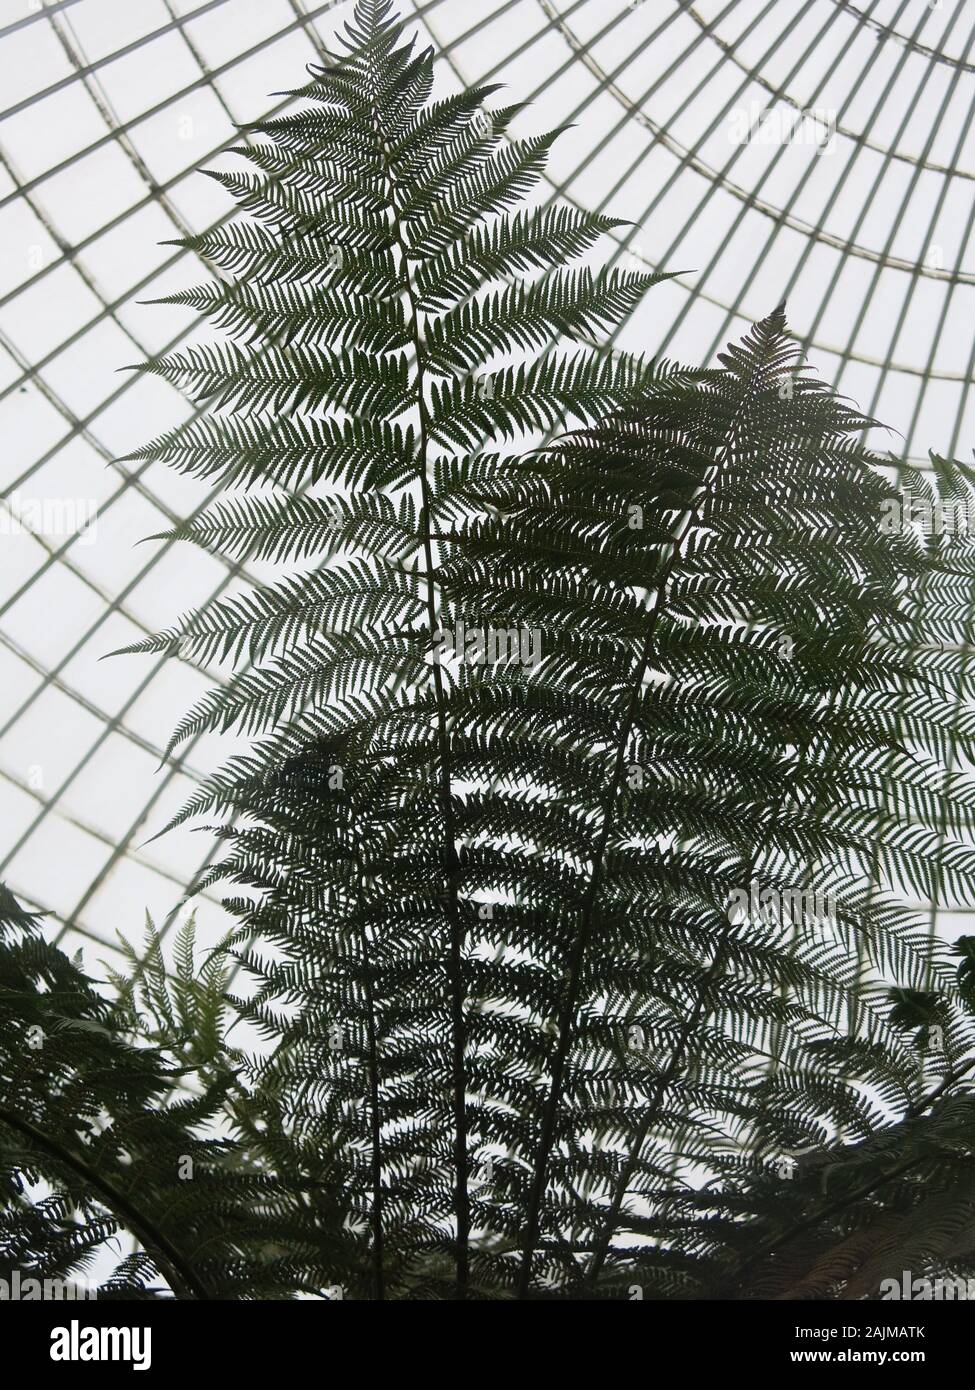 Looking up through lacy tree fern fronds into the concentric circles of the domed glass ceiling of the Kibble Palace at Glasgow Botanic Gardens. Stock Photo